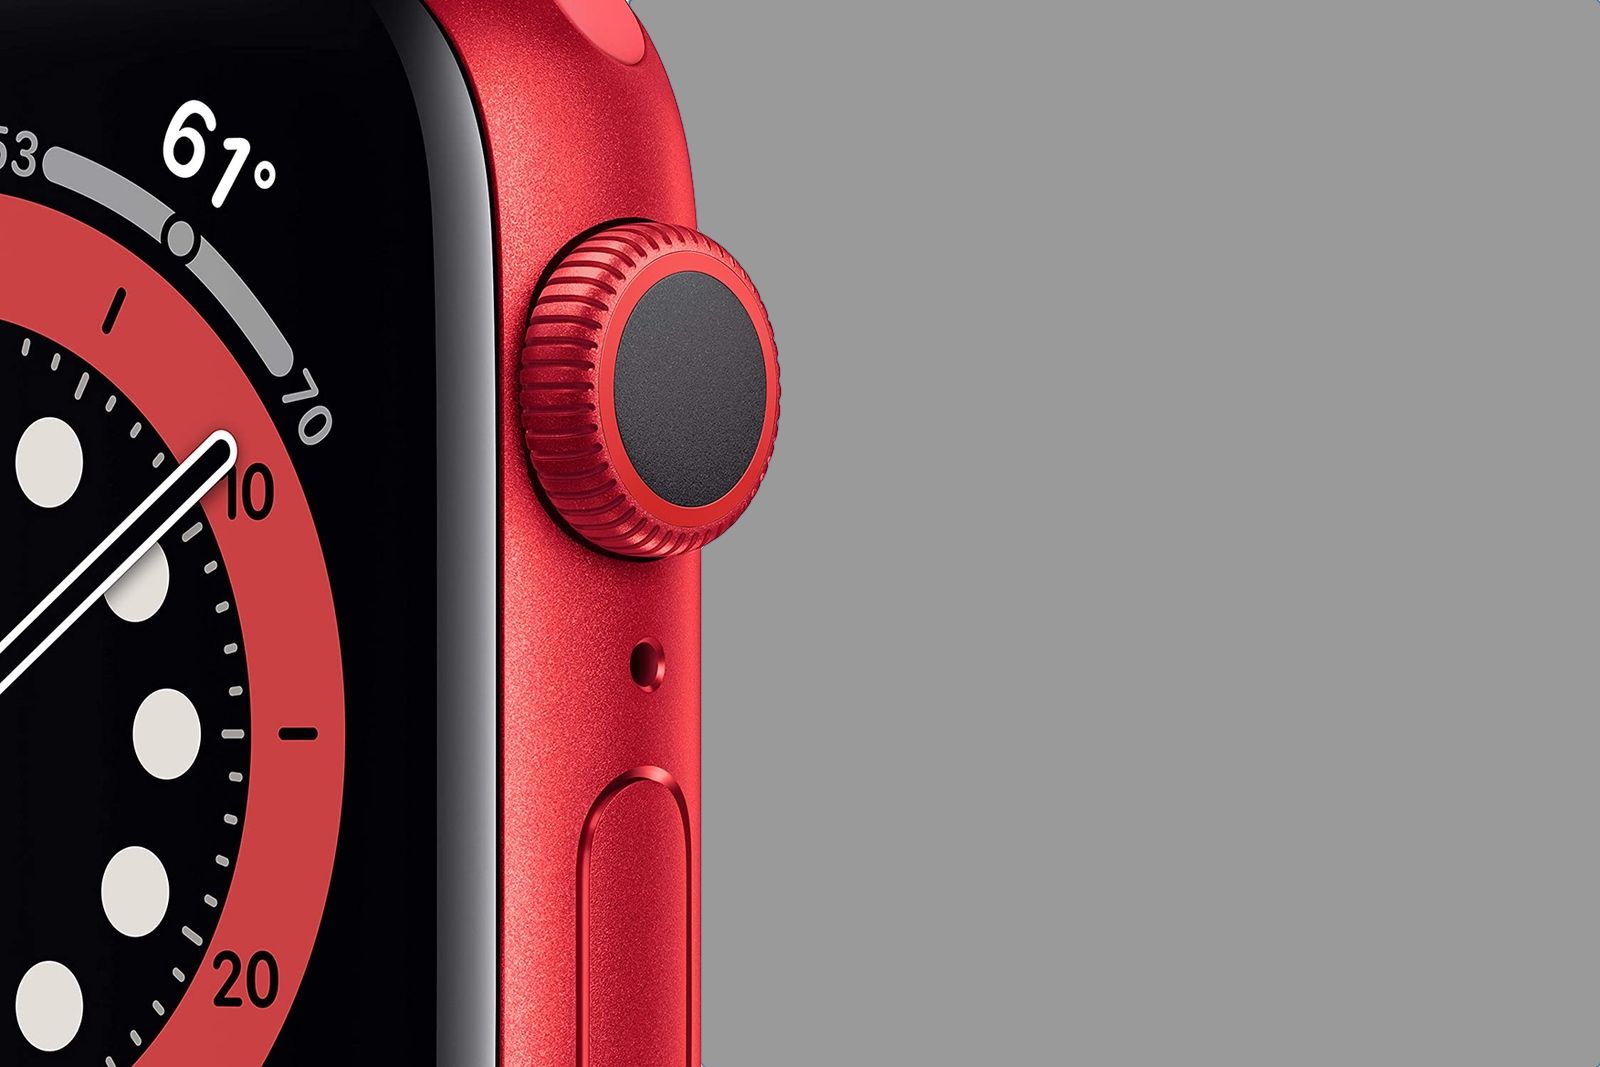 The new Apple Watch Series 6 is already discounted for Black Friday photo 1